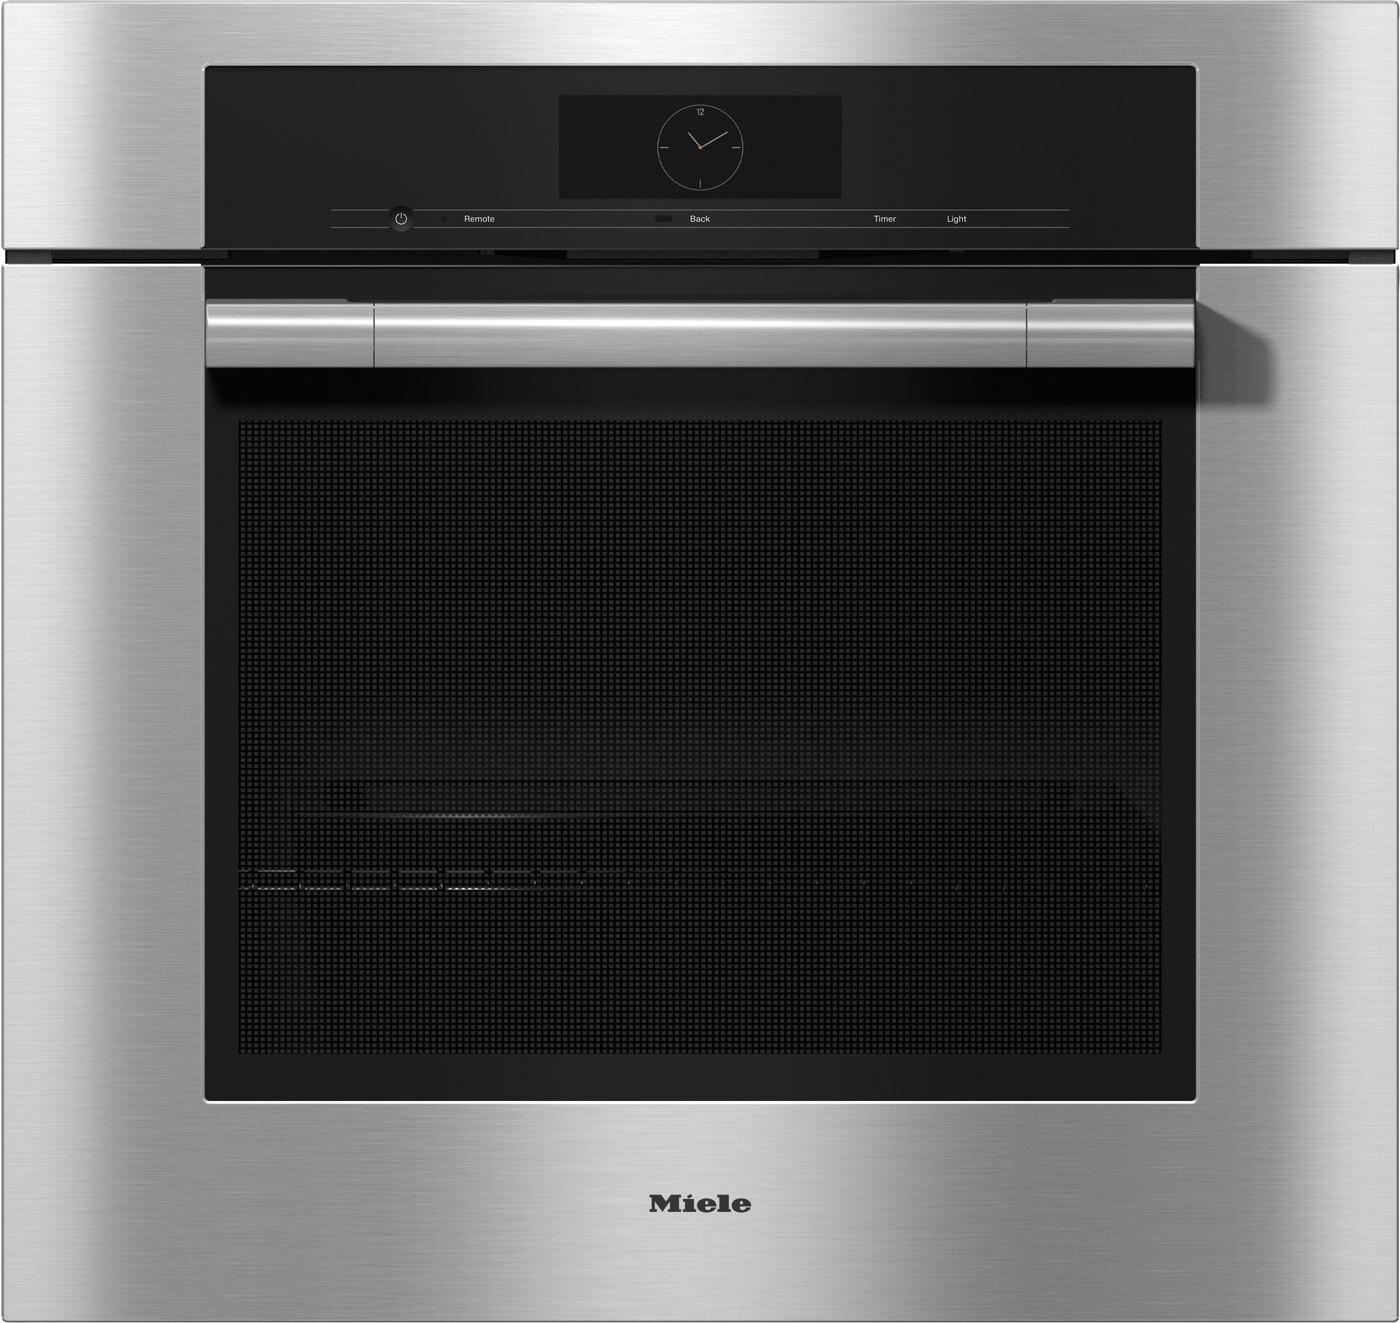 7000 Series ContourLine 30"" Single Electric Wall Oven - Miele H7780BPCTS